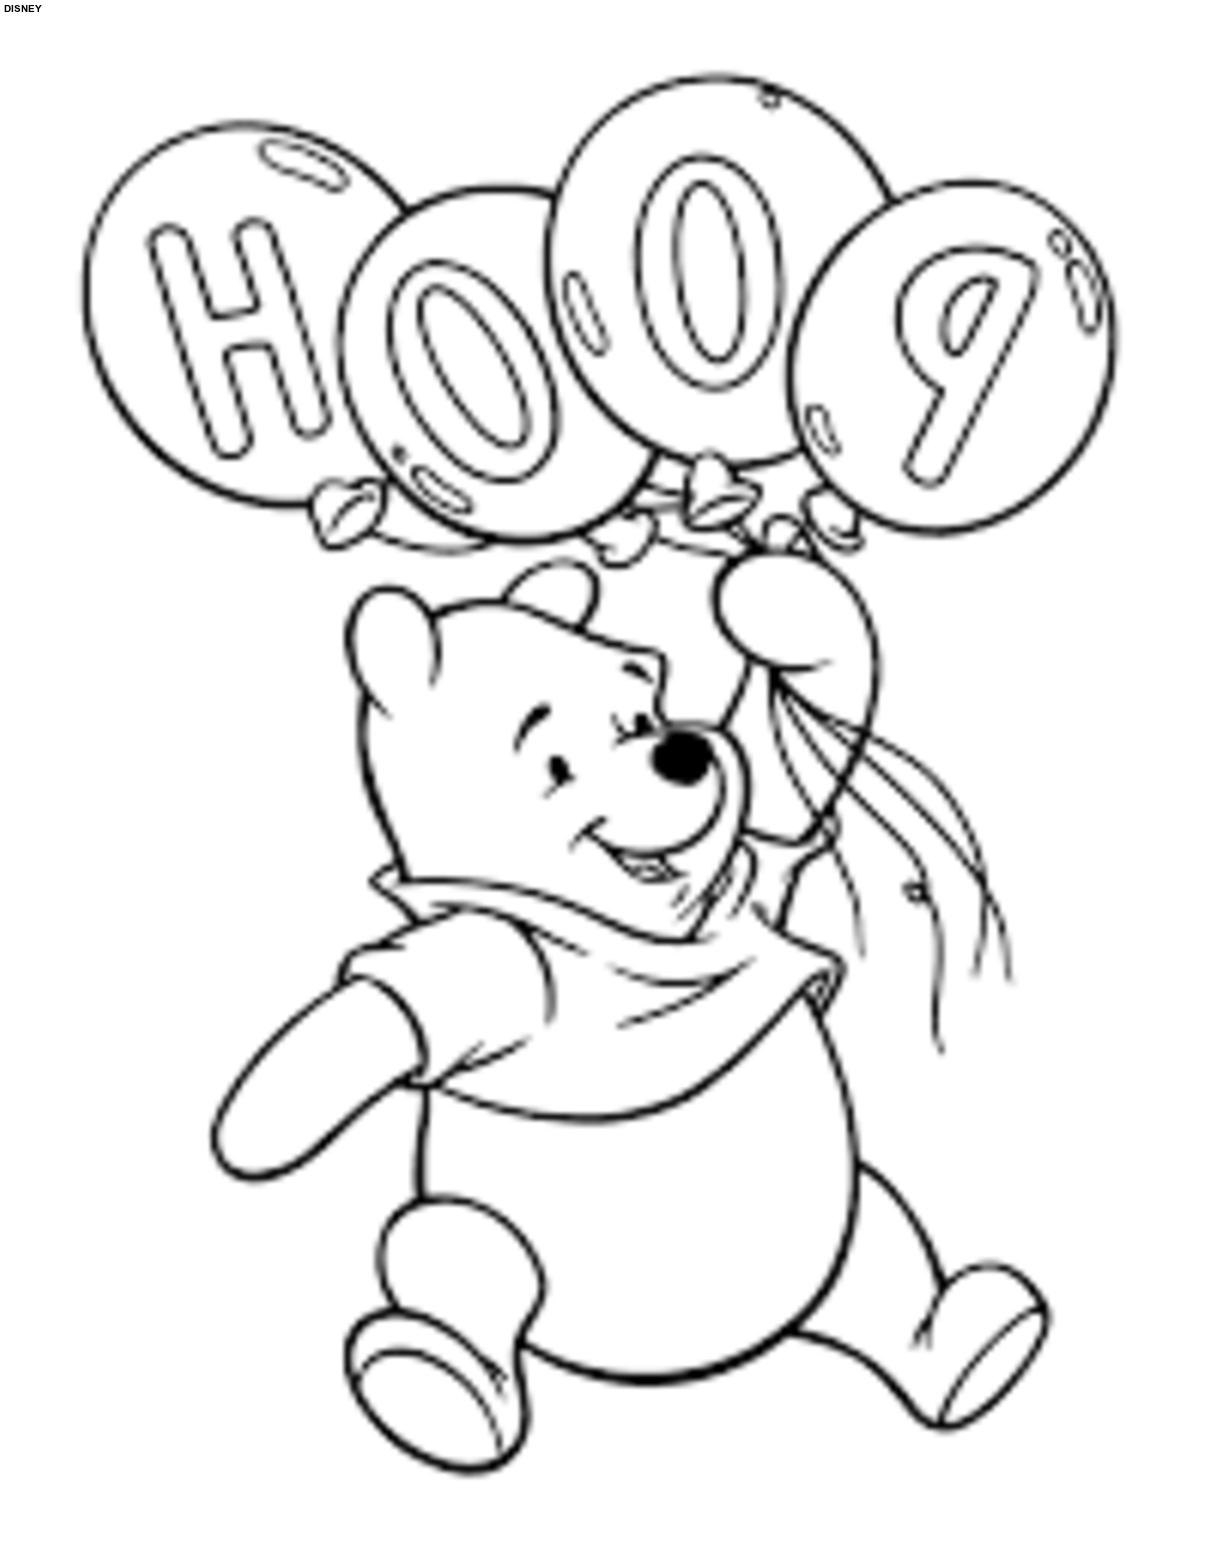 43+ Coloring Pages Disney For Boys Gif - COLORIST